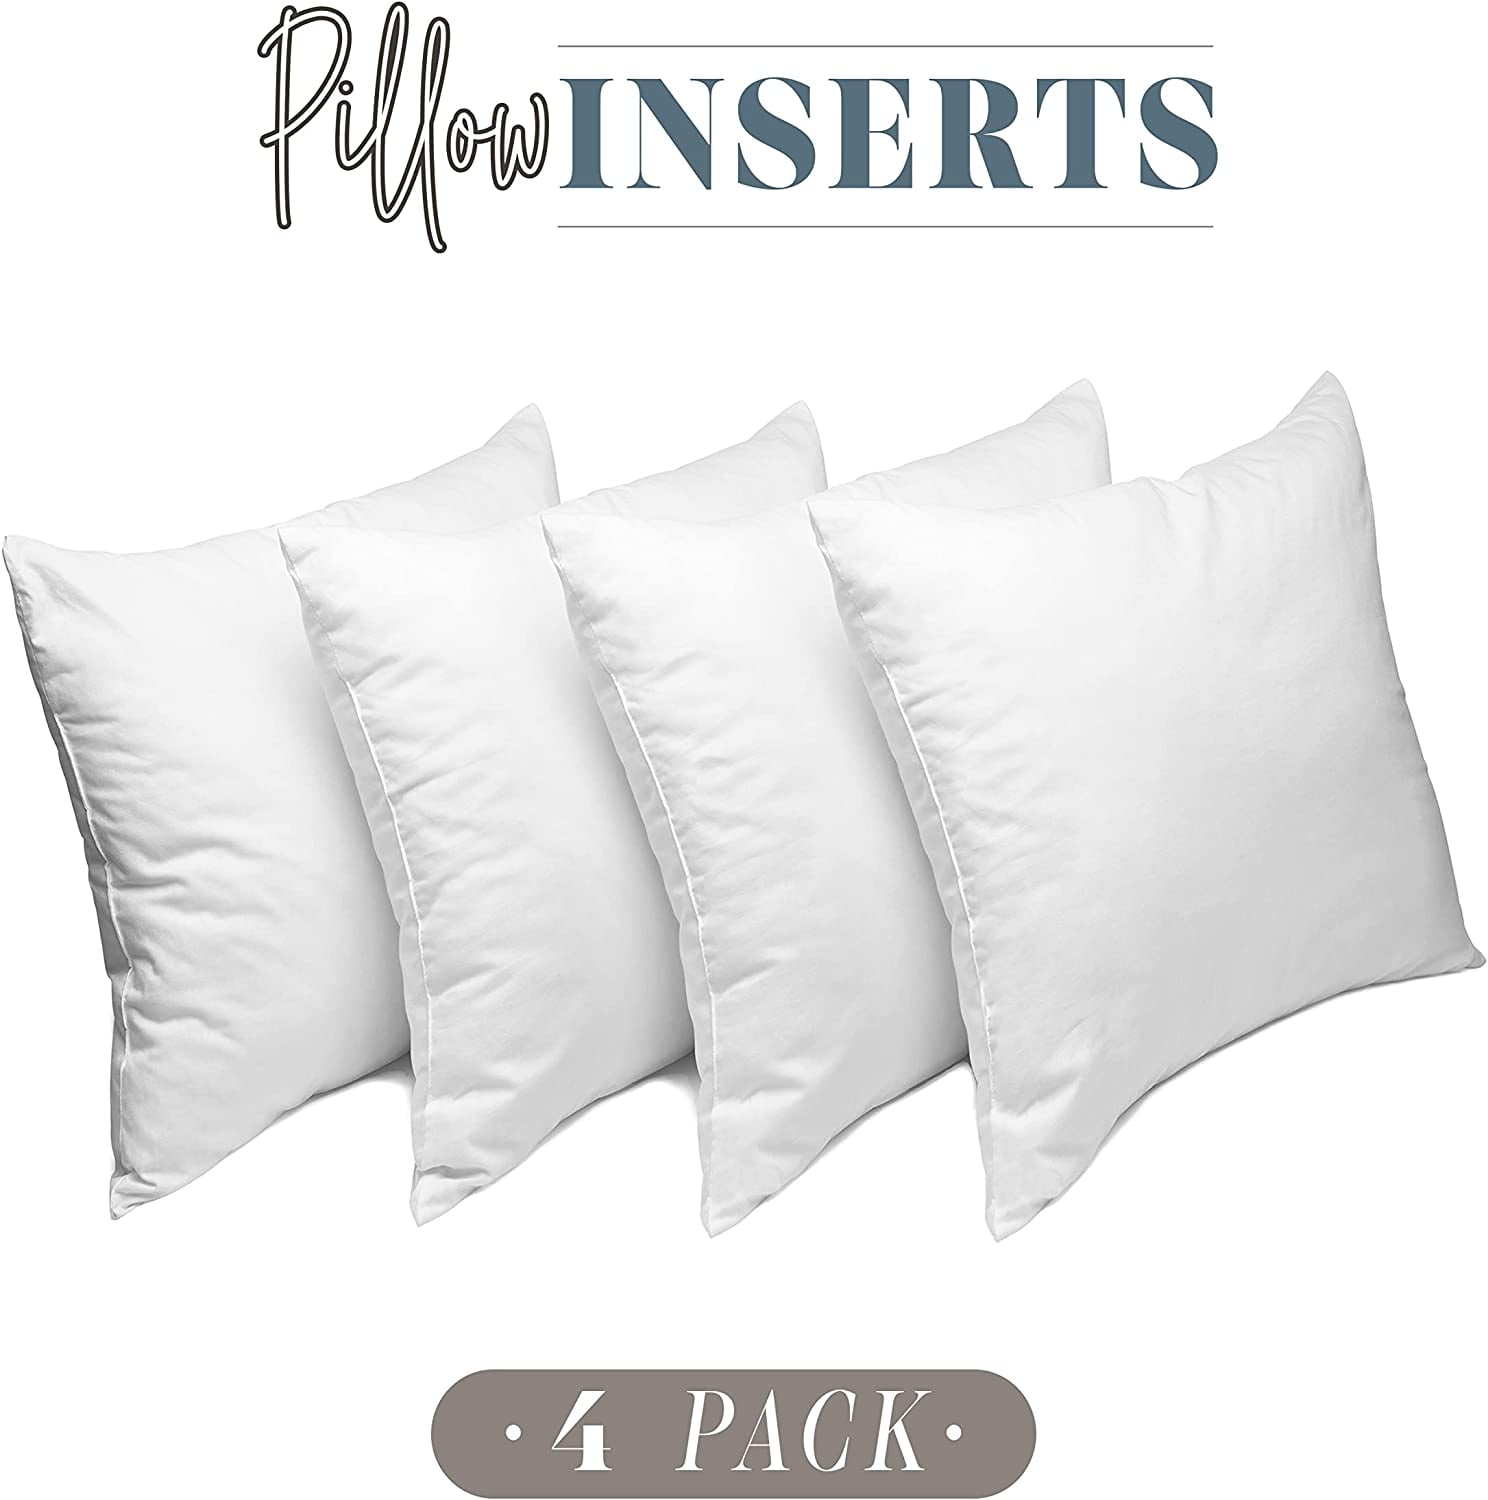 Phantoscope 18 x 18 Outdoor Pillow Inserts - Pack of 4 Square Form Water Resistant Decorative Throw Pillows, Made in USA, White